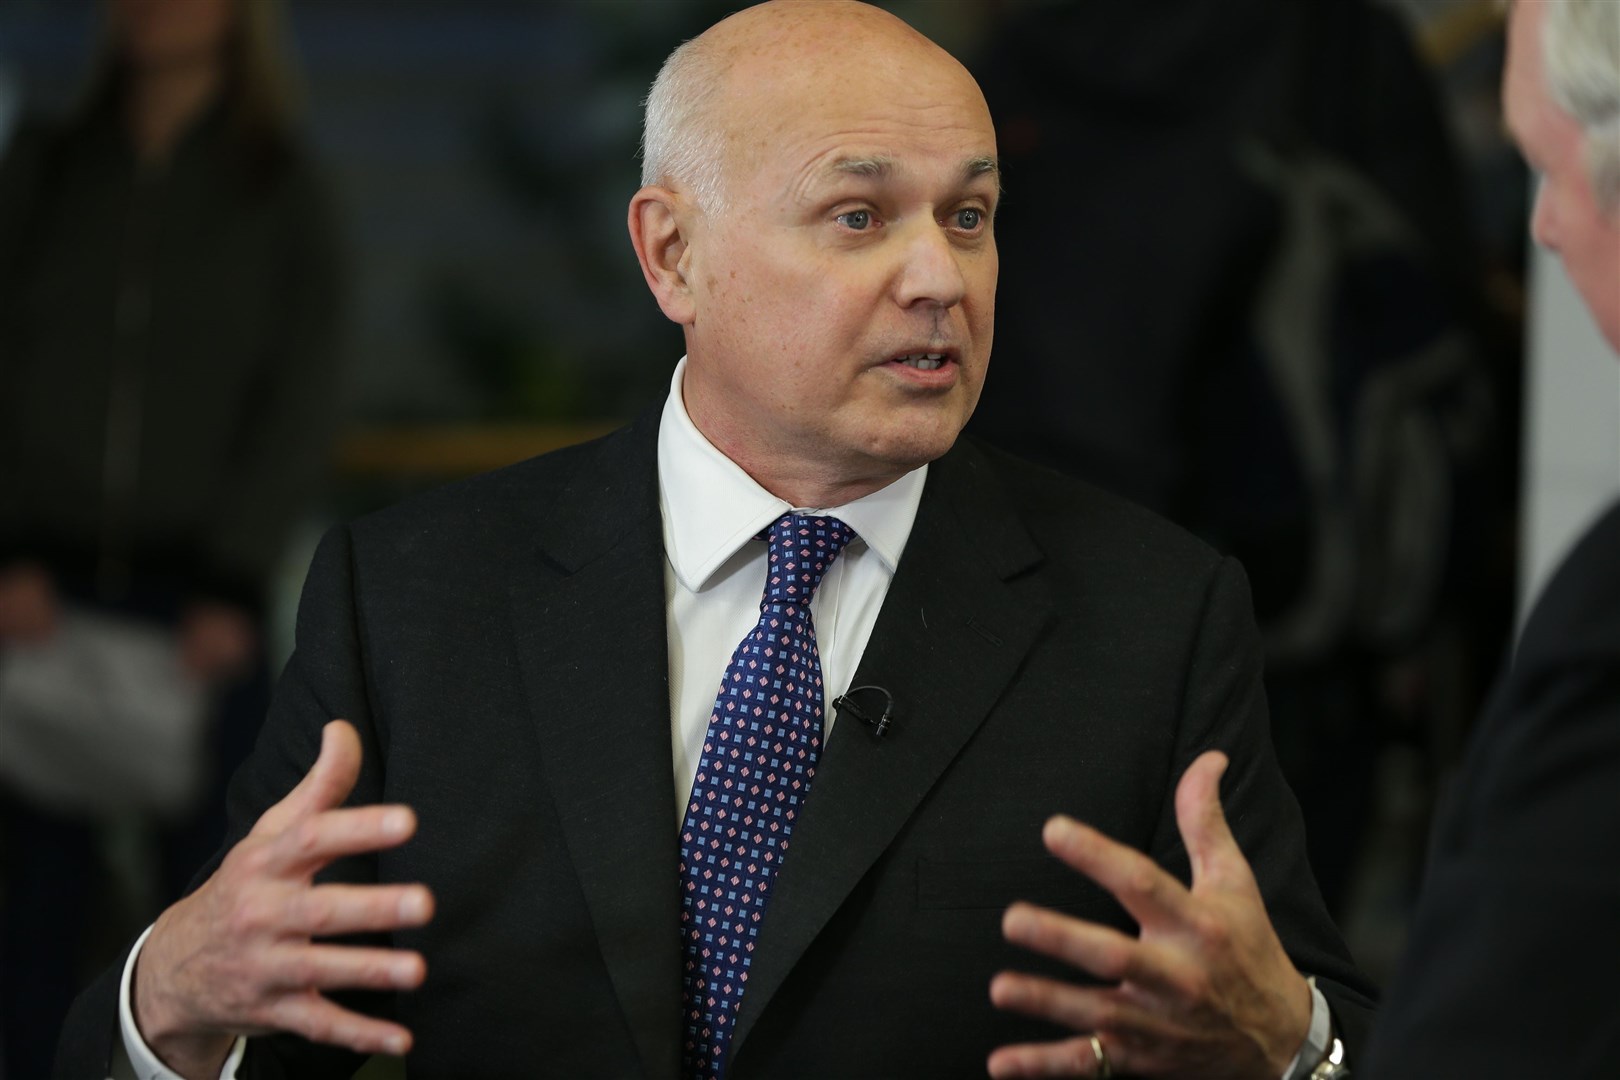 Sir Iain Duncan Smith urged Tory MPs to stop plotting during the Platinum Jubilee (Daniel Leal-Olivas/PA)